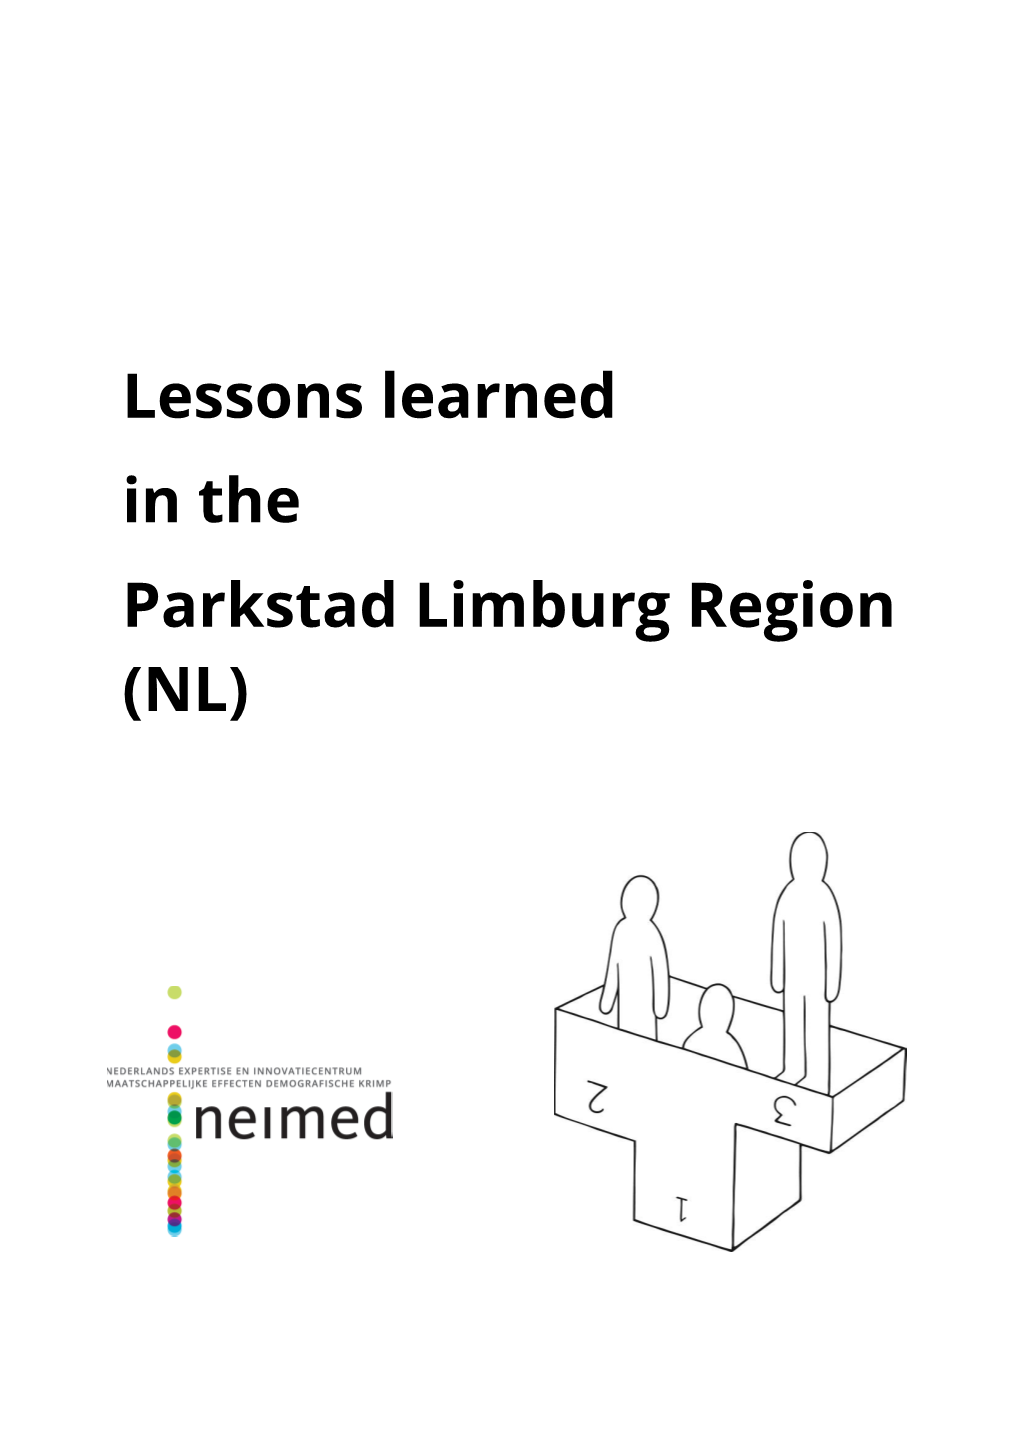 Lessons Learned in the Parkstad Limburg Region (NL)